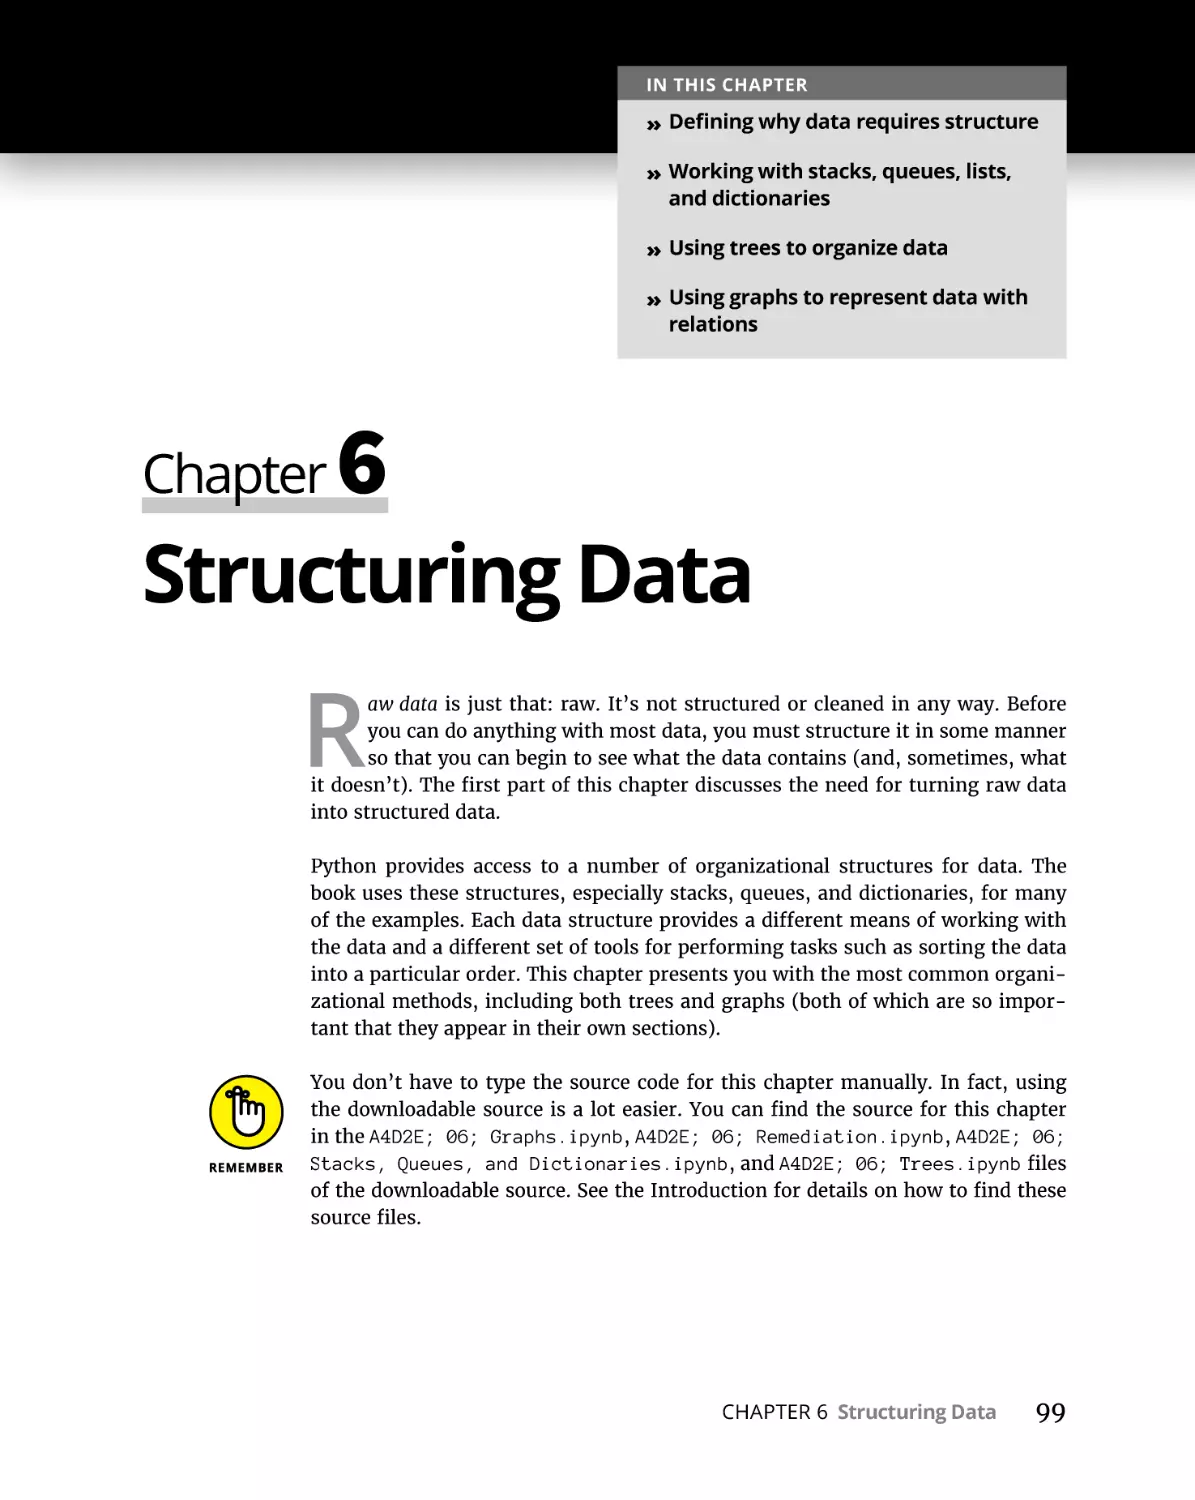 Chapter 6 Structuring Data